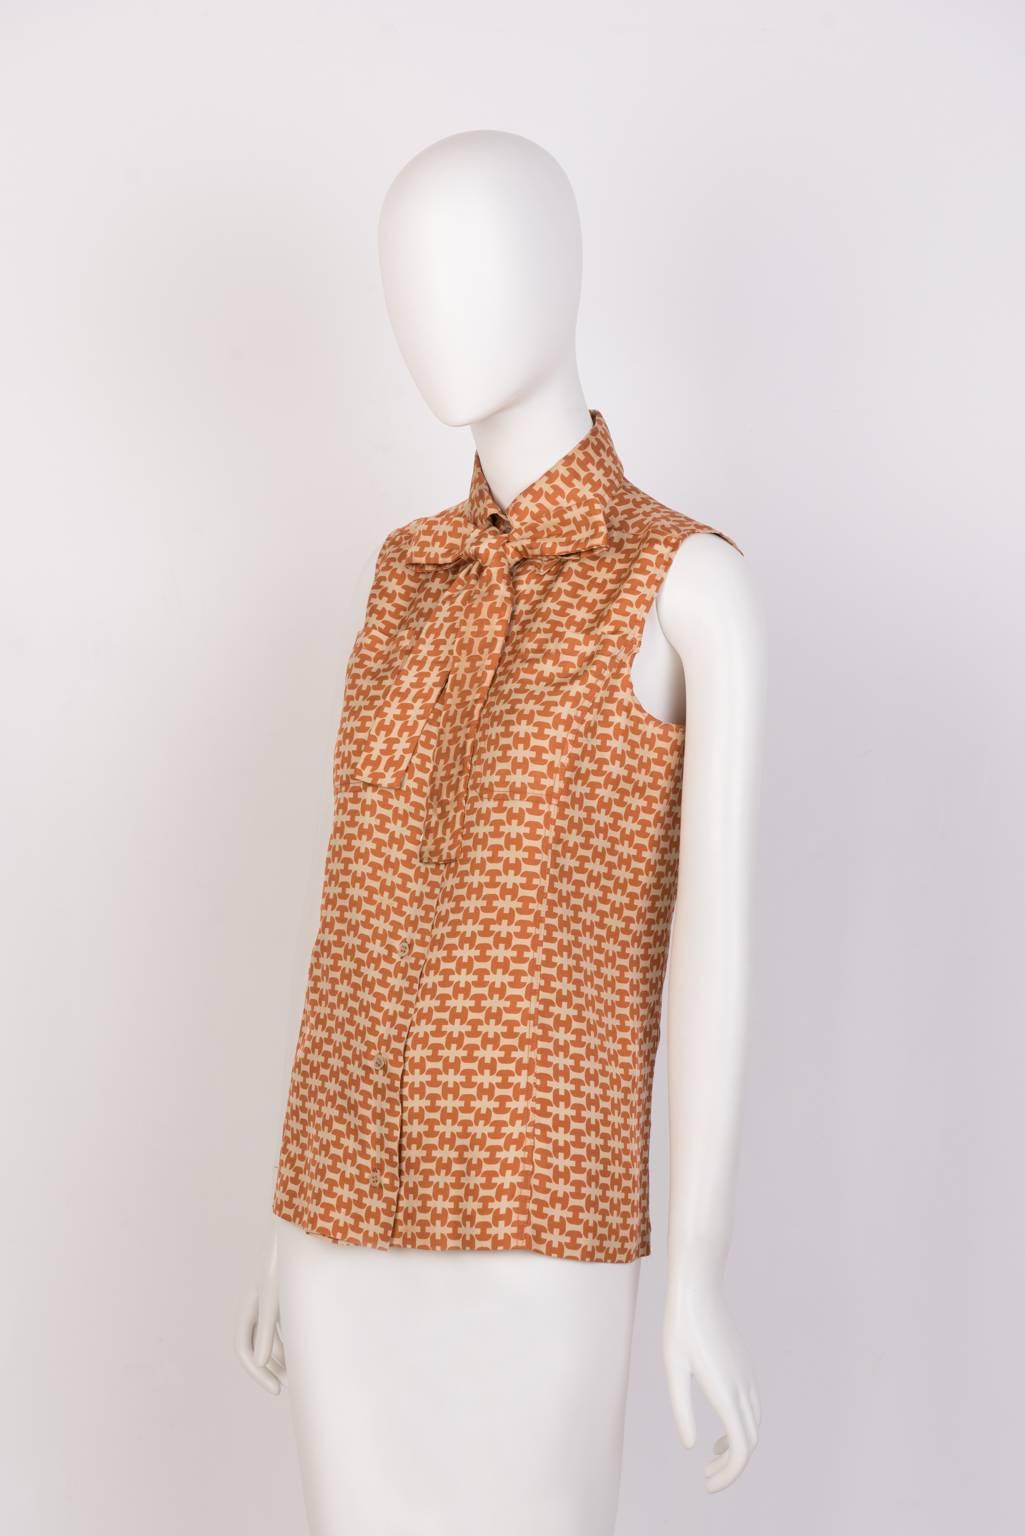 Sleeveless silk blouse with subtle H print, front pockets, and detachable collar bow.